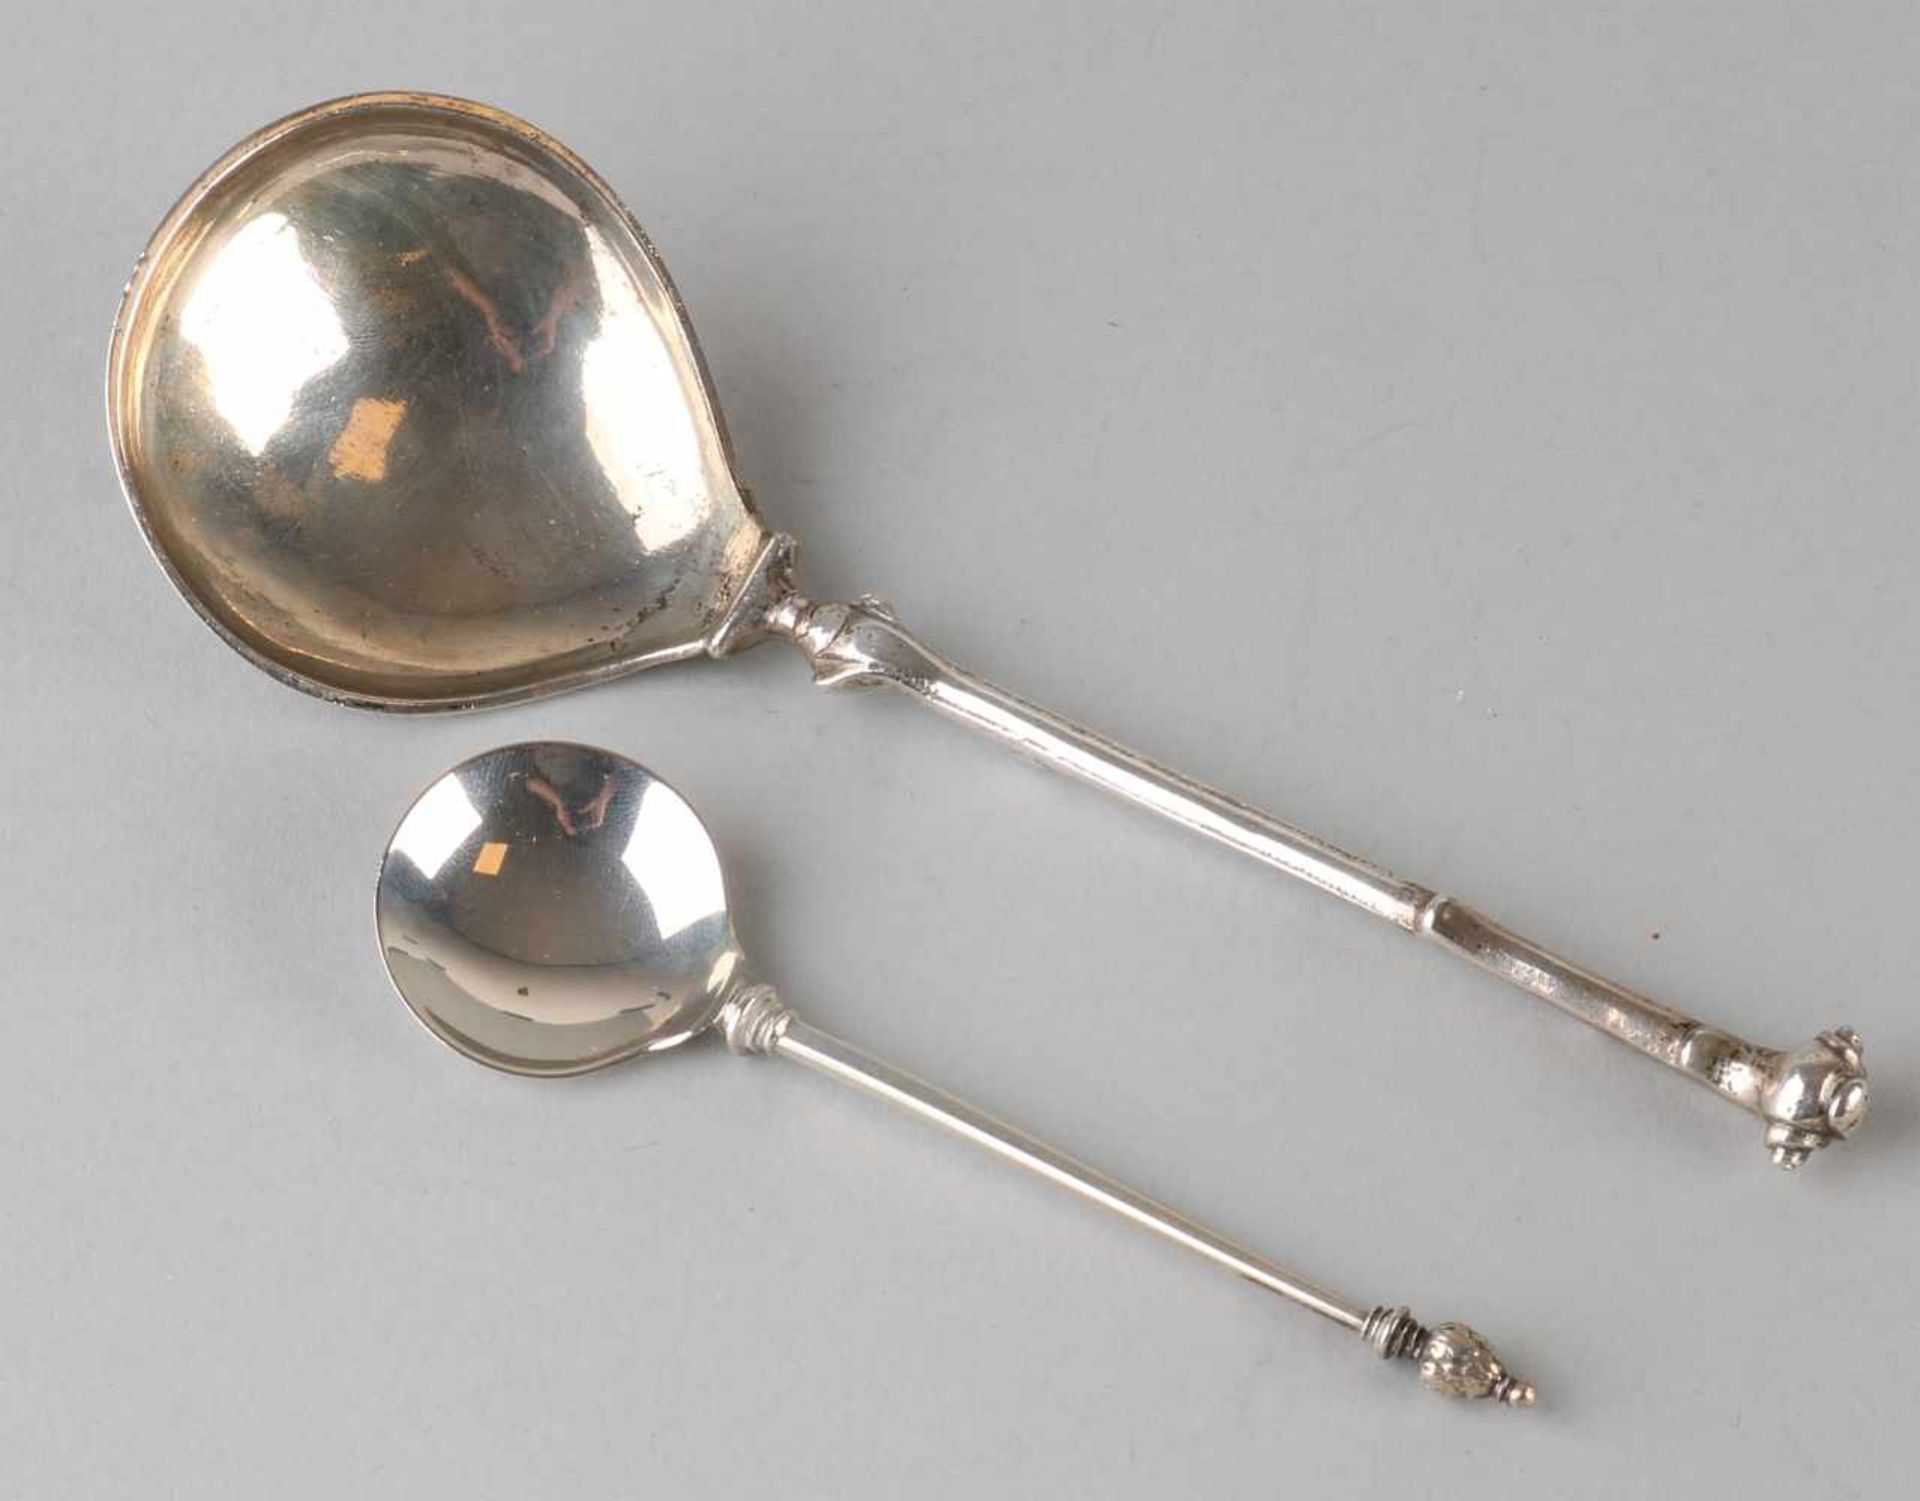 Two silver spoons, 833/000, one 18th century with round silver spoon bowl and a stem with a